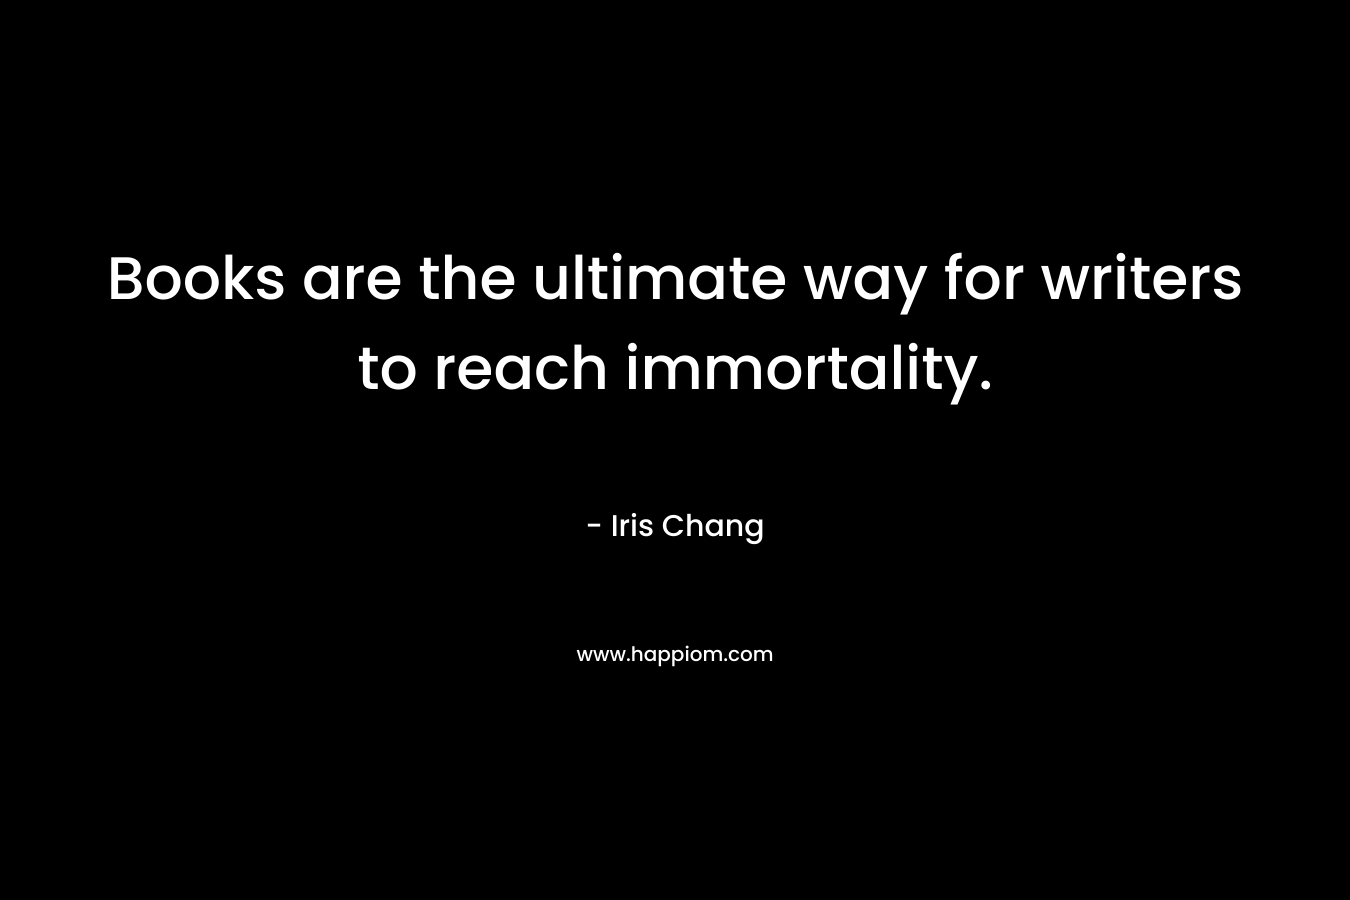 Books are the ultimate way for writers to reach immortality.